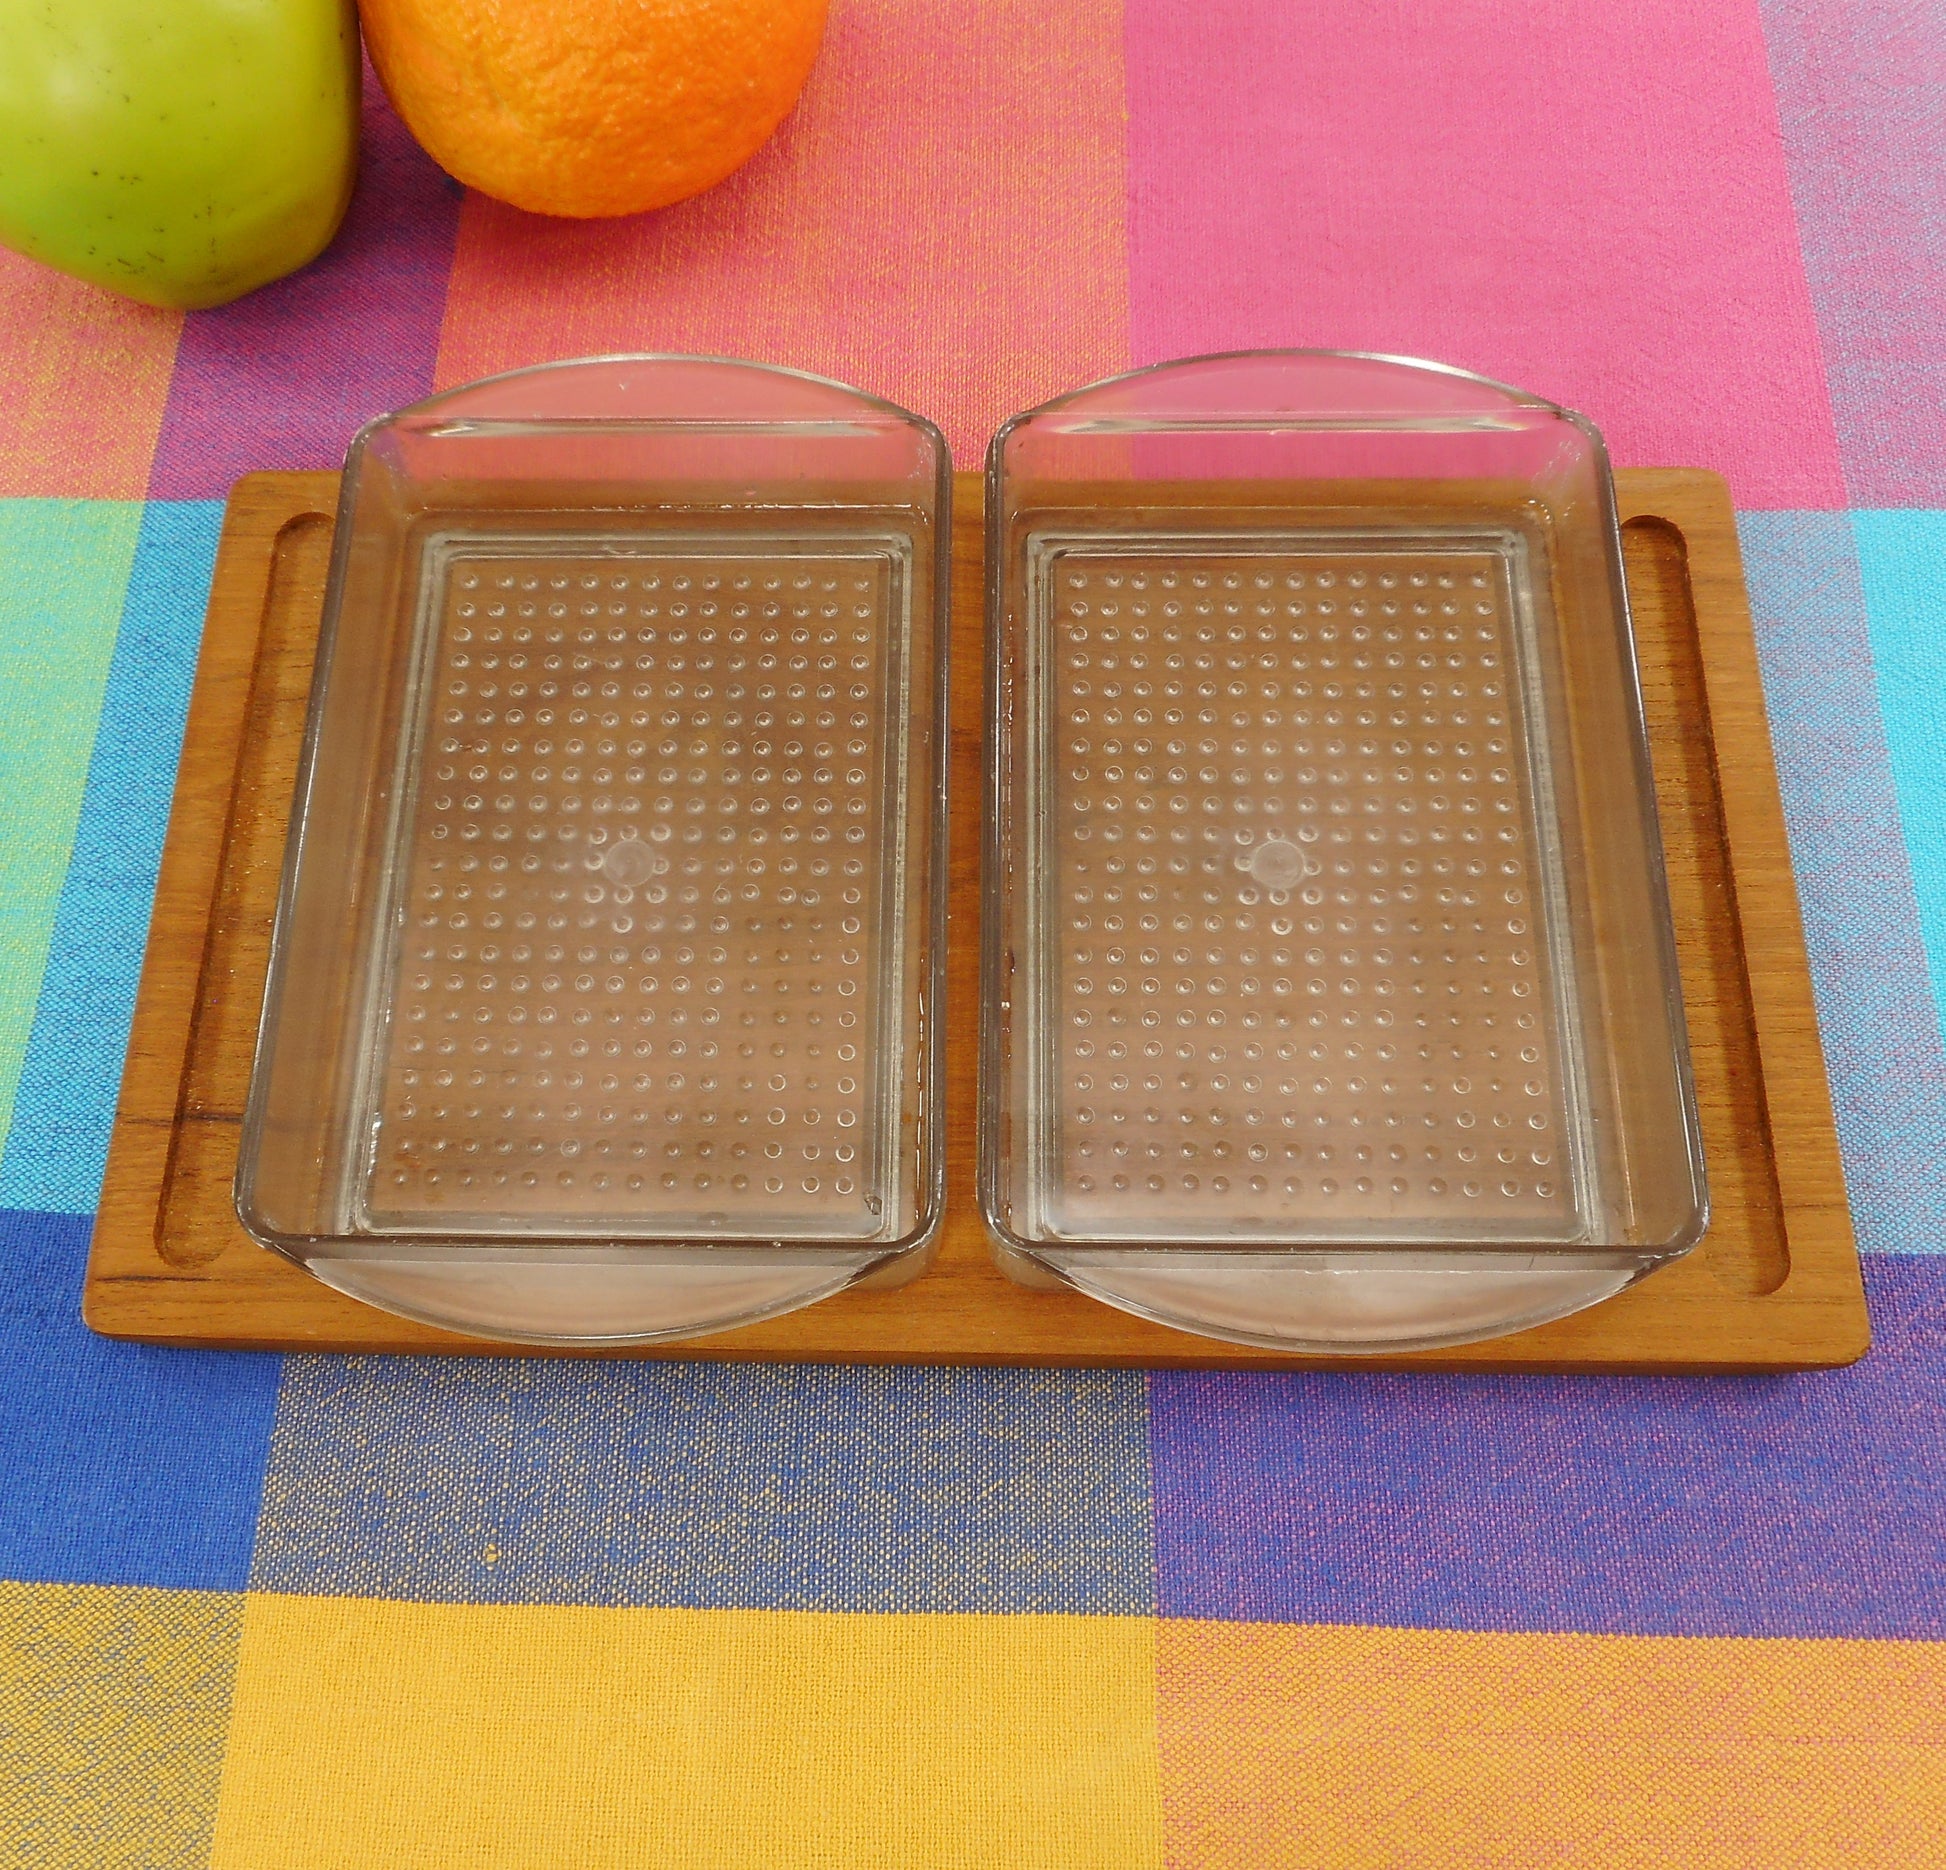 Liithje Denmark Teak Wood Serving Relish Tray - Two Plastic Dishes